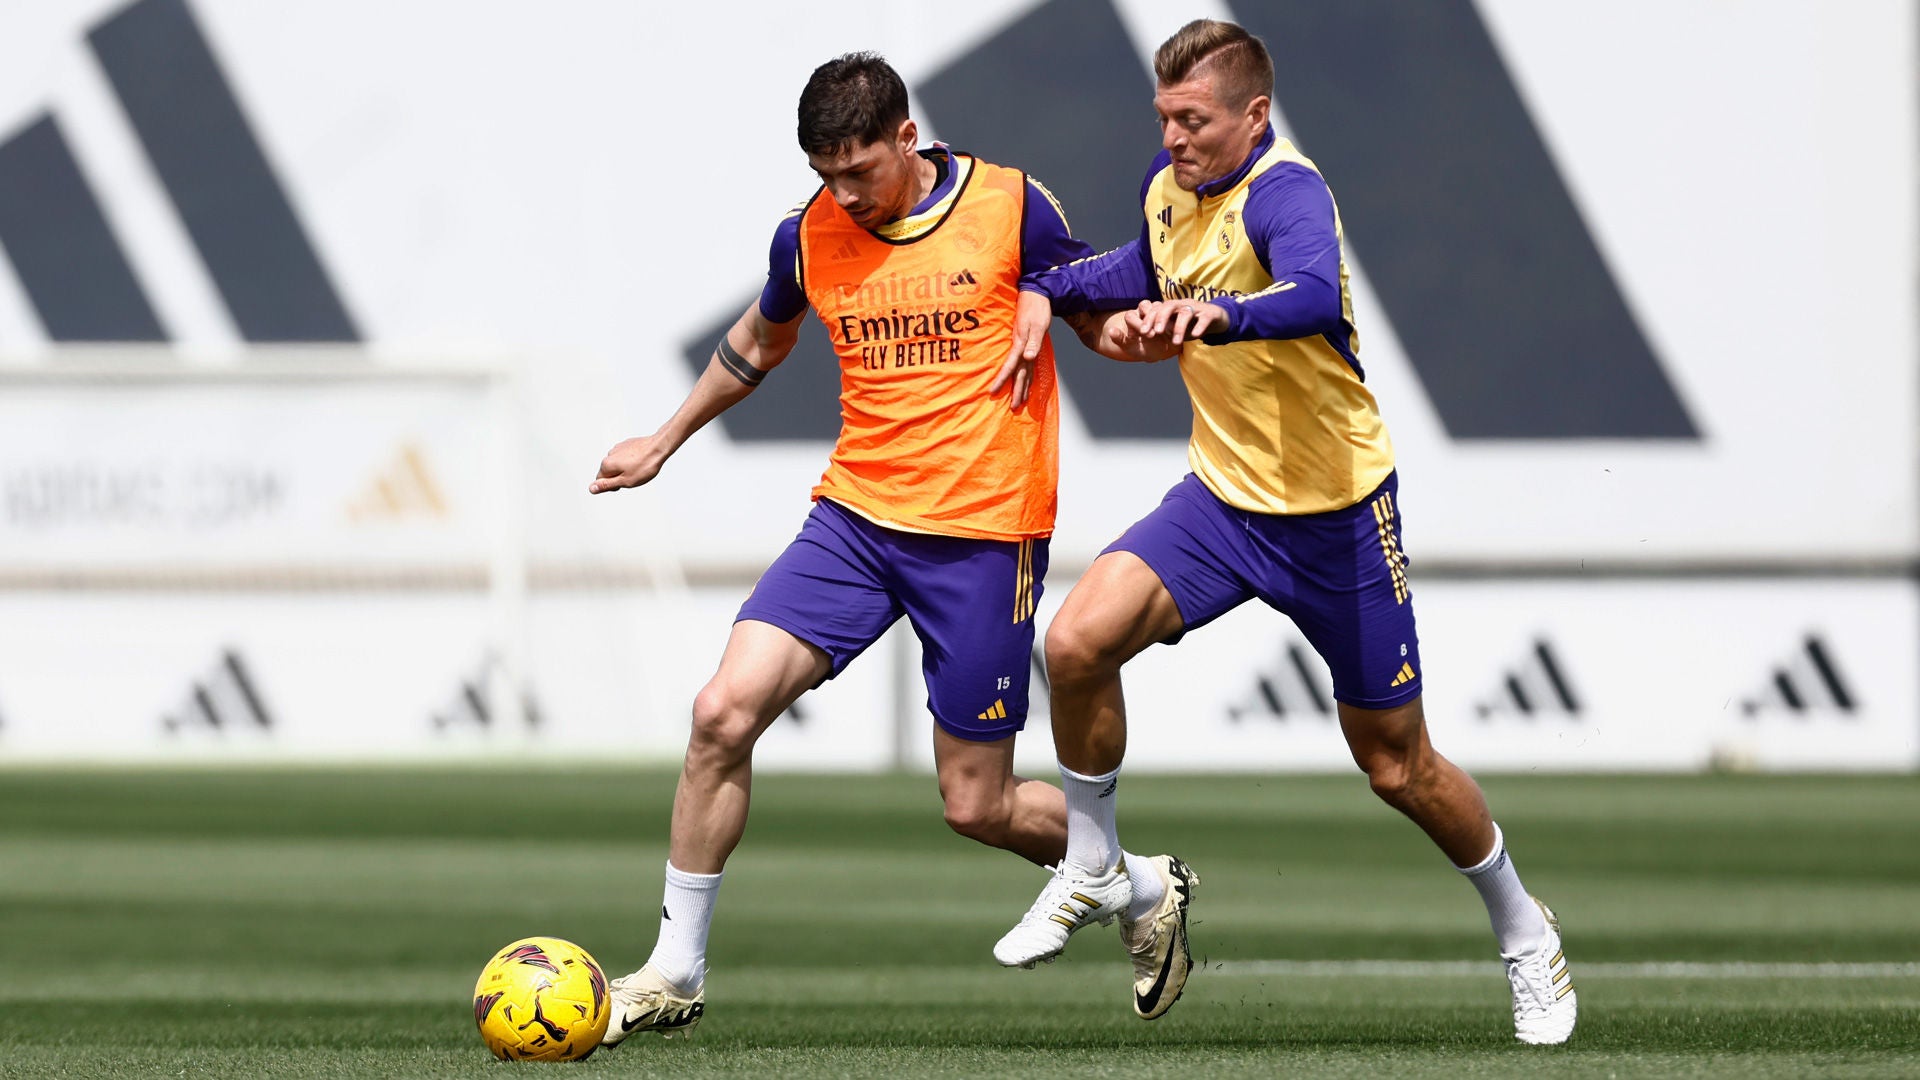 Final training session ahead of the Clásico